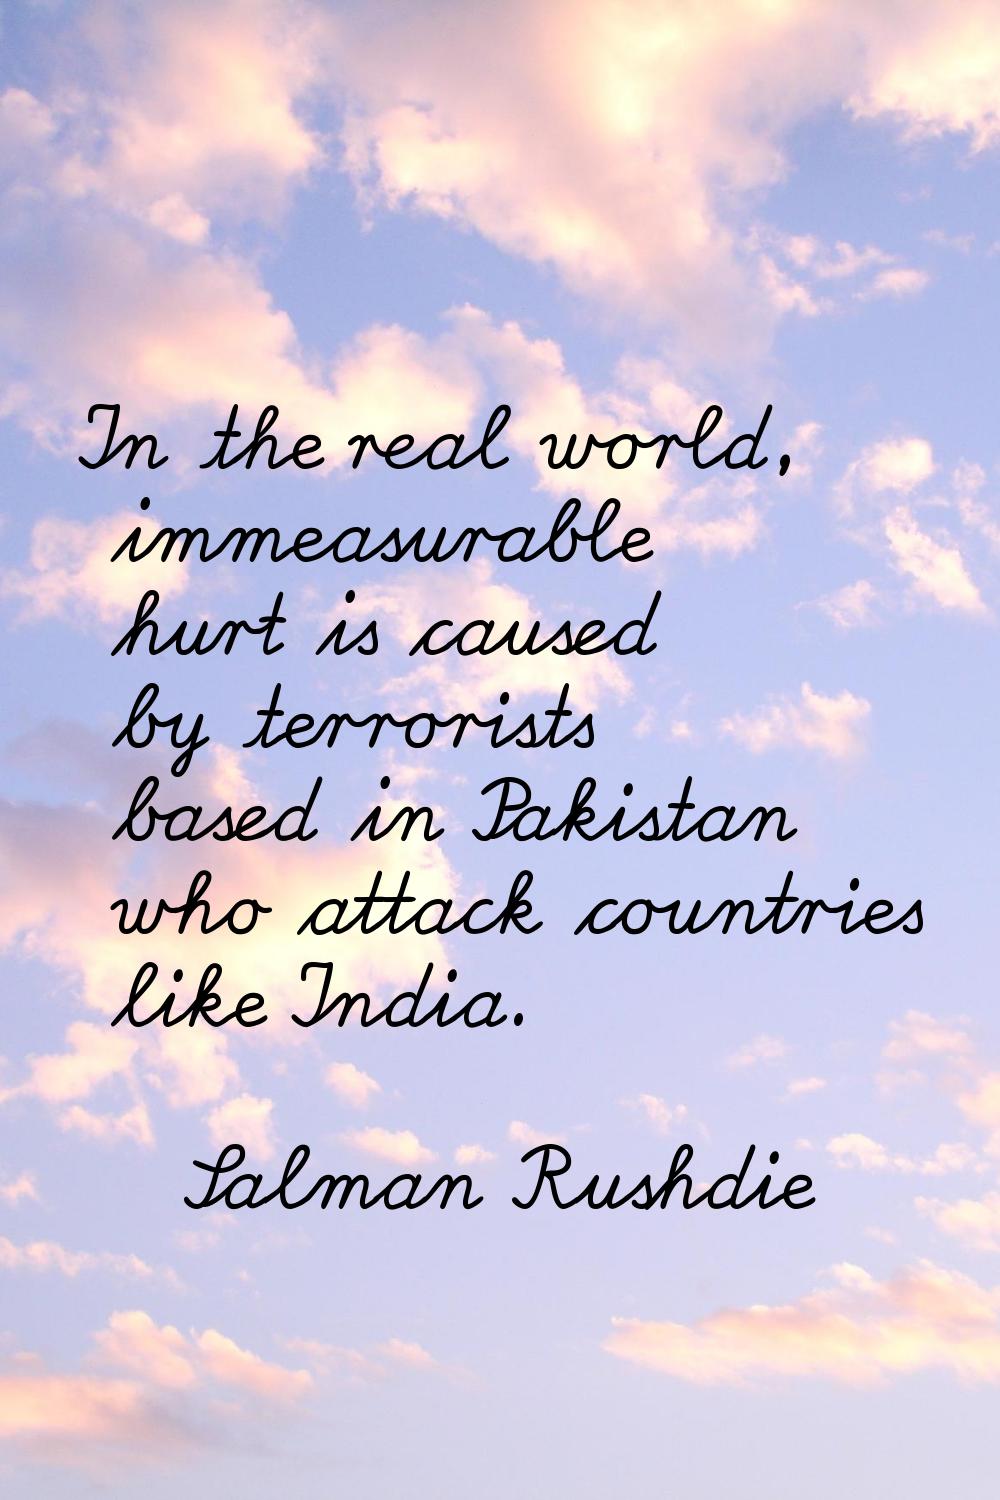 In the real world, immeasurable hurt is caused by terrorists based in Pakistan who attack countries